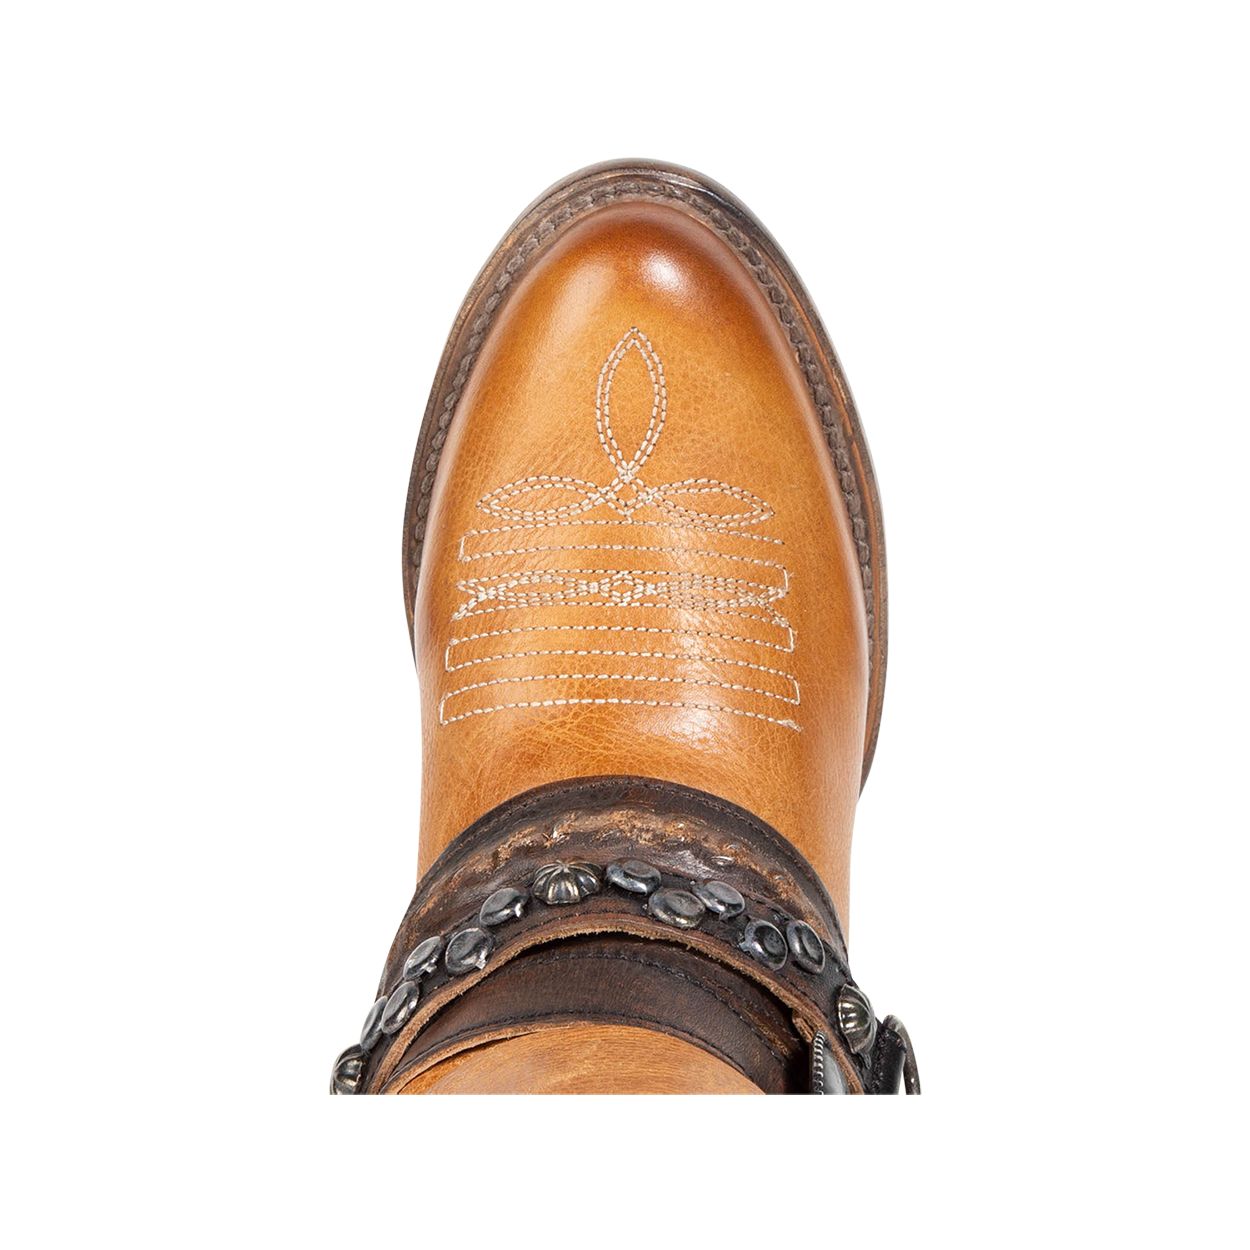 Top view showing round toe and stitch detailing on FREEBIRD women's Rodondo wheat boot